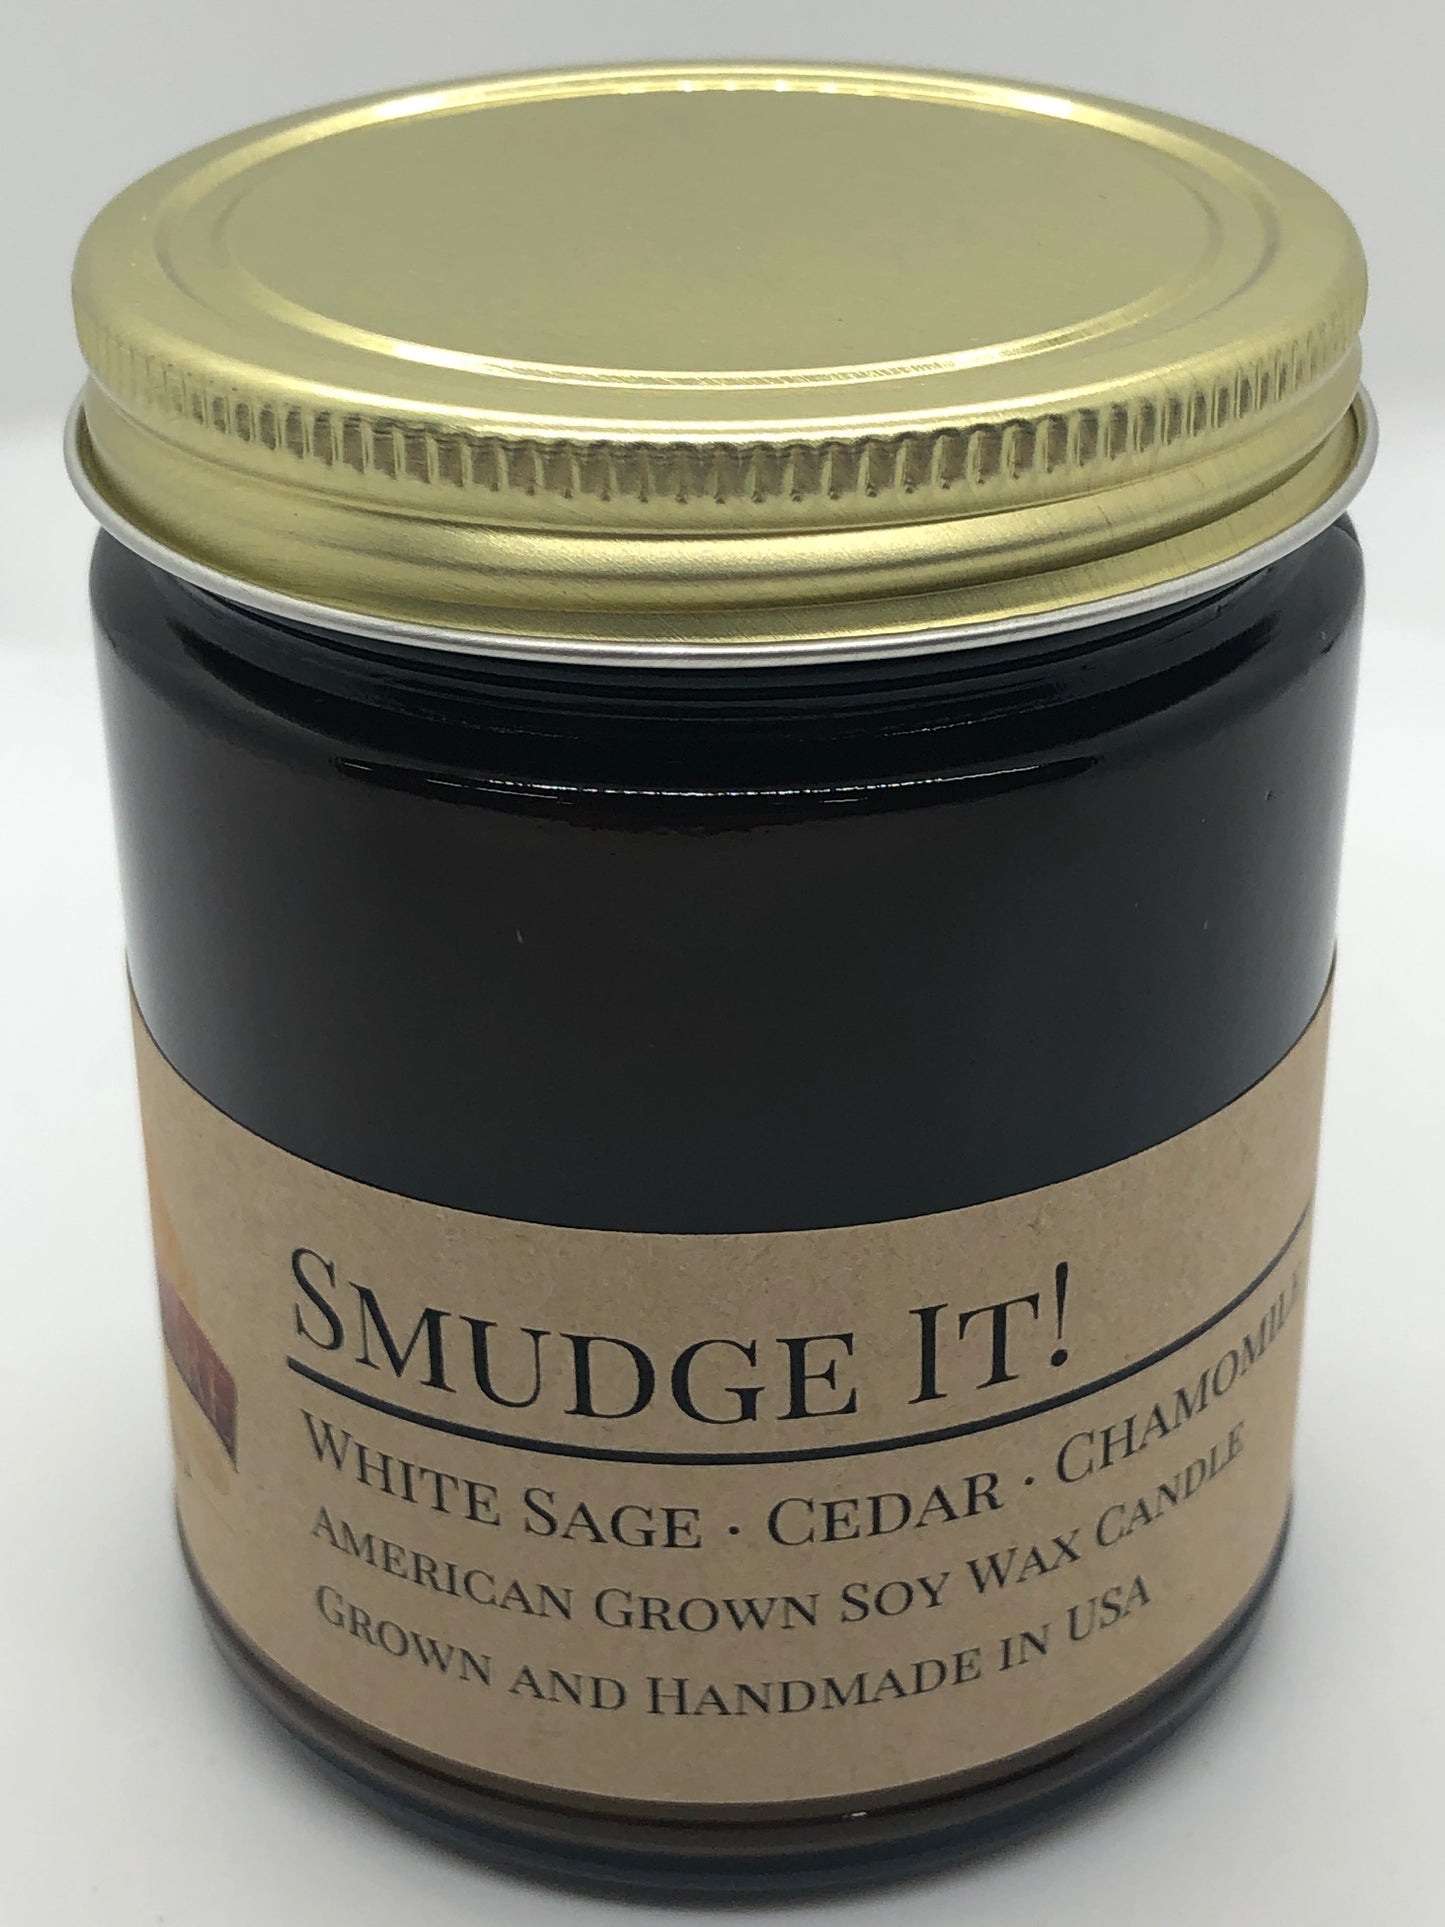 Smudge It! Soy Candle | 9 oz Amber Apothecary Jar